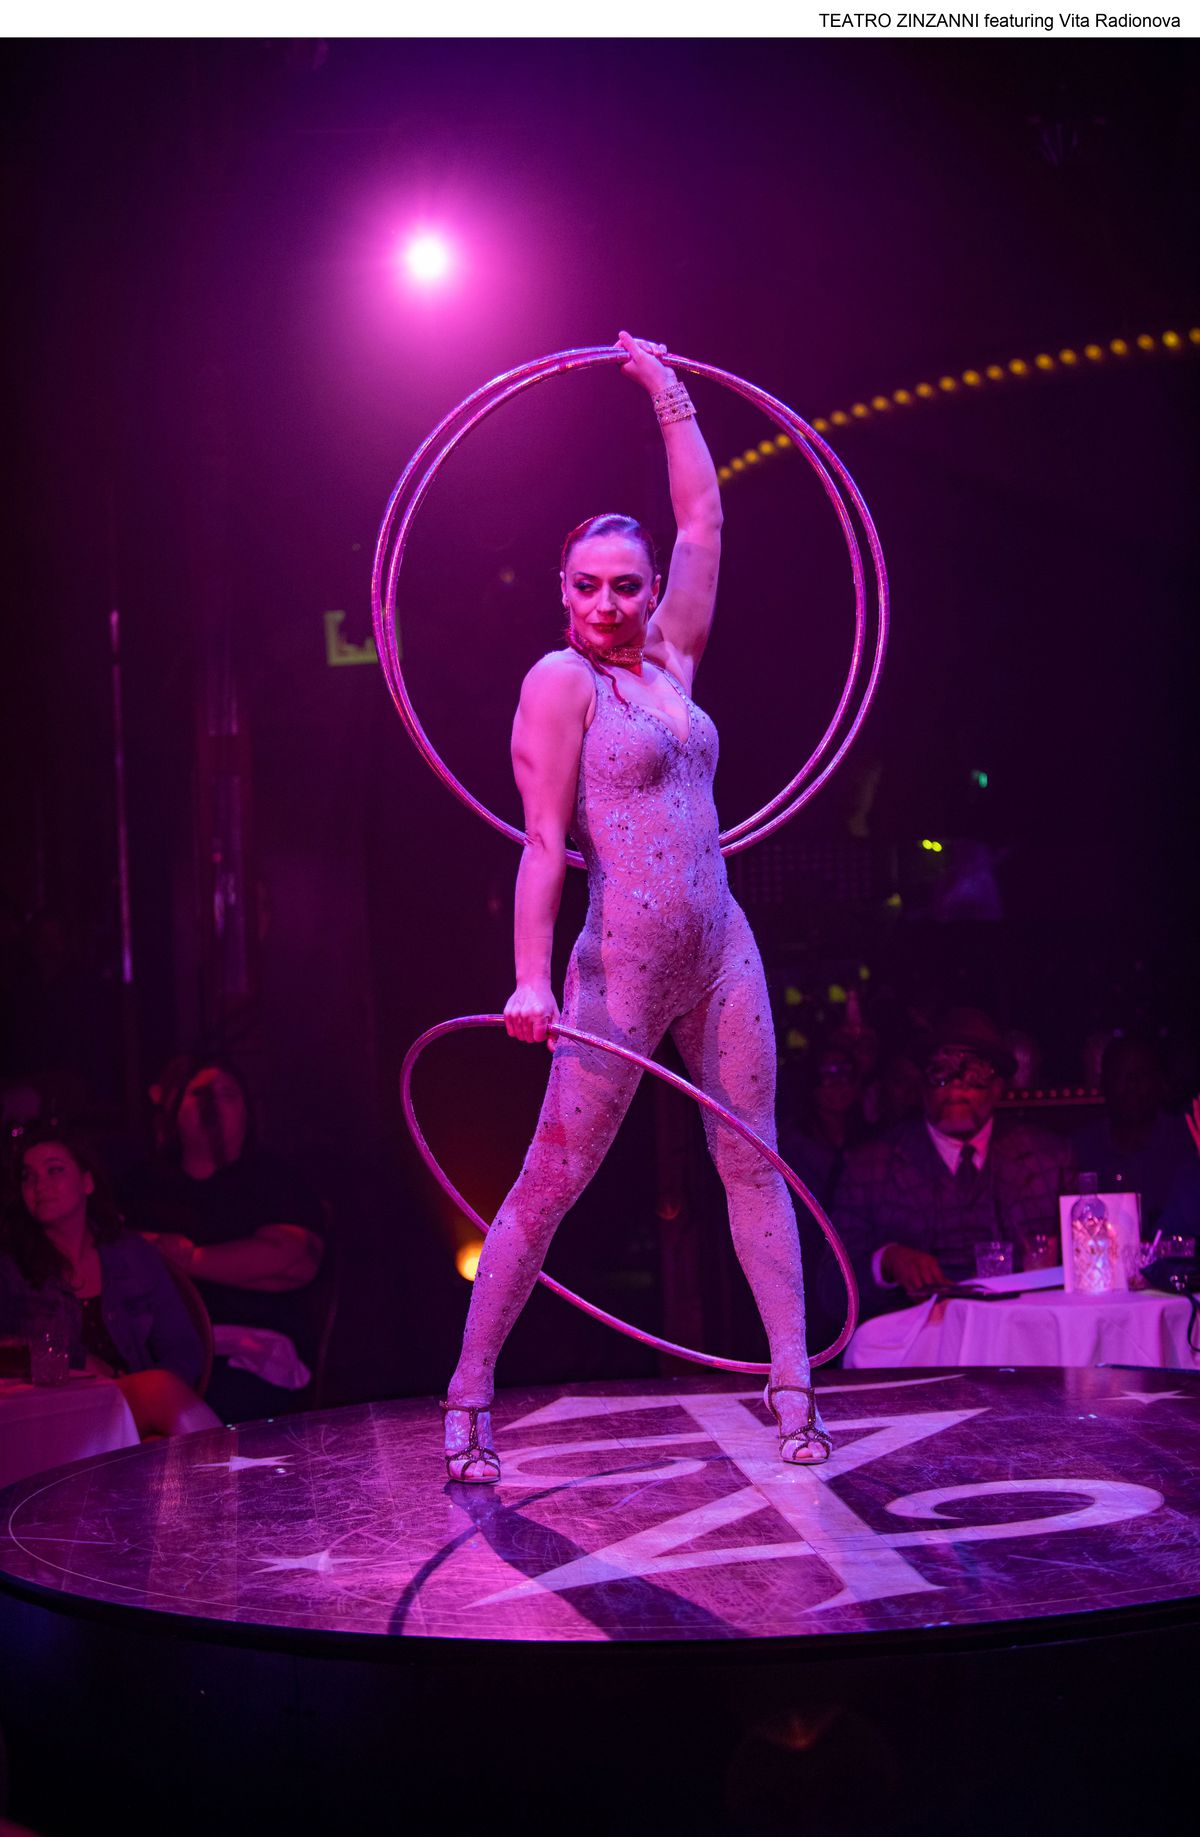 Contortionist Vita Radionova is a beast at hula-hooping — adding the thick circles until you’ve lost count and she is consumed by a spiraling hoop barrel — at Teatro Zinzanni, a 2 1/2-hour feast for the senses running through Nov. 28 at the downtown Cambria Hotel.